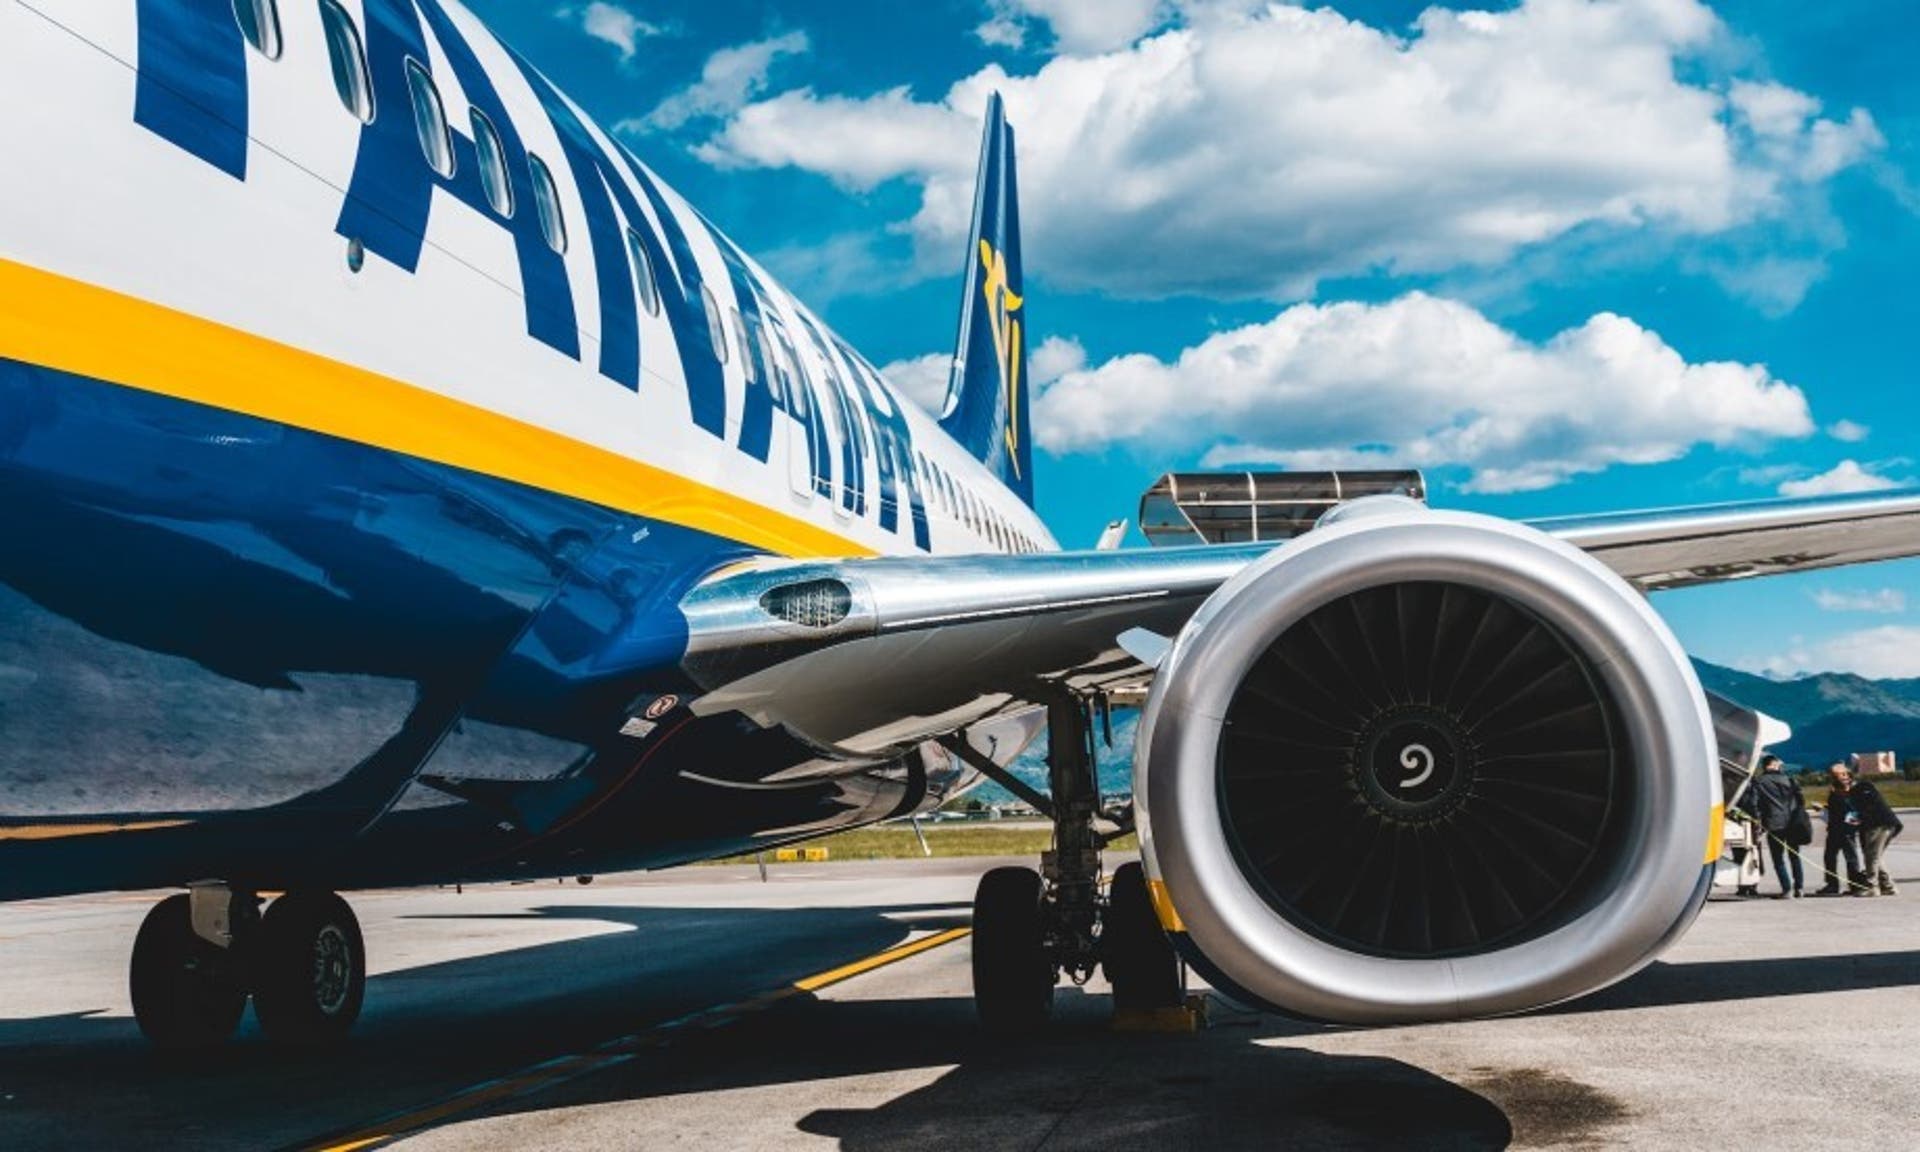  Image of a Ryanair plane sitting on an airport runway on a sunny day 